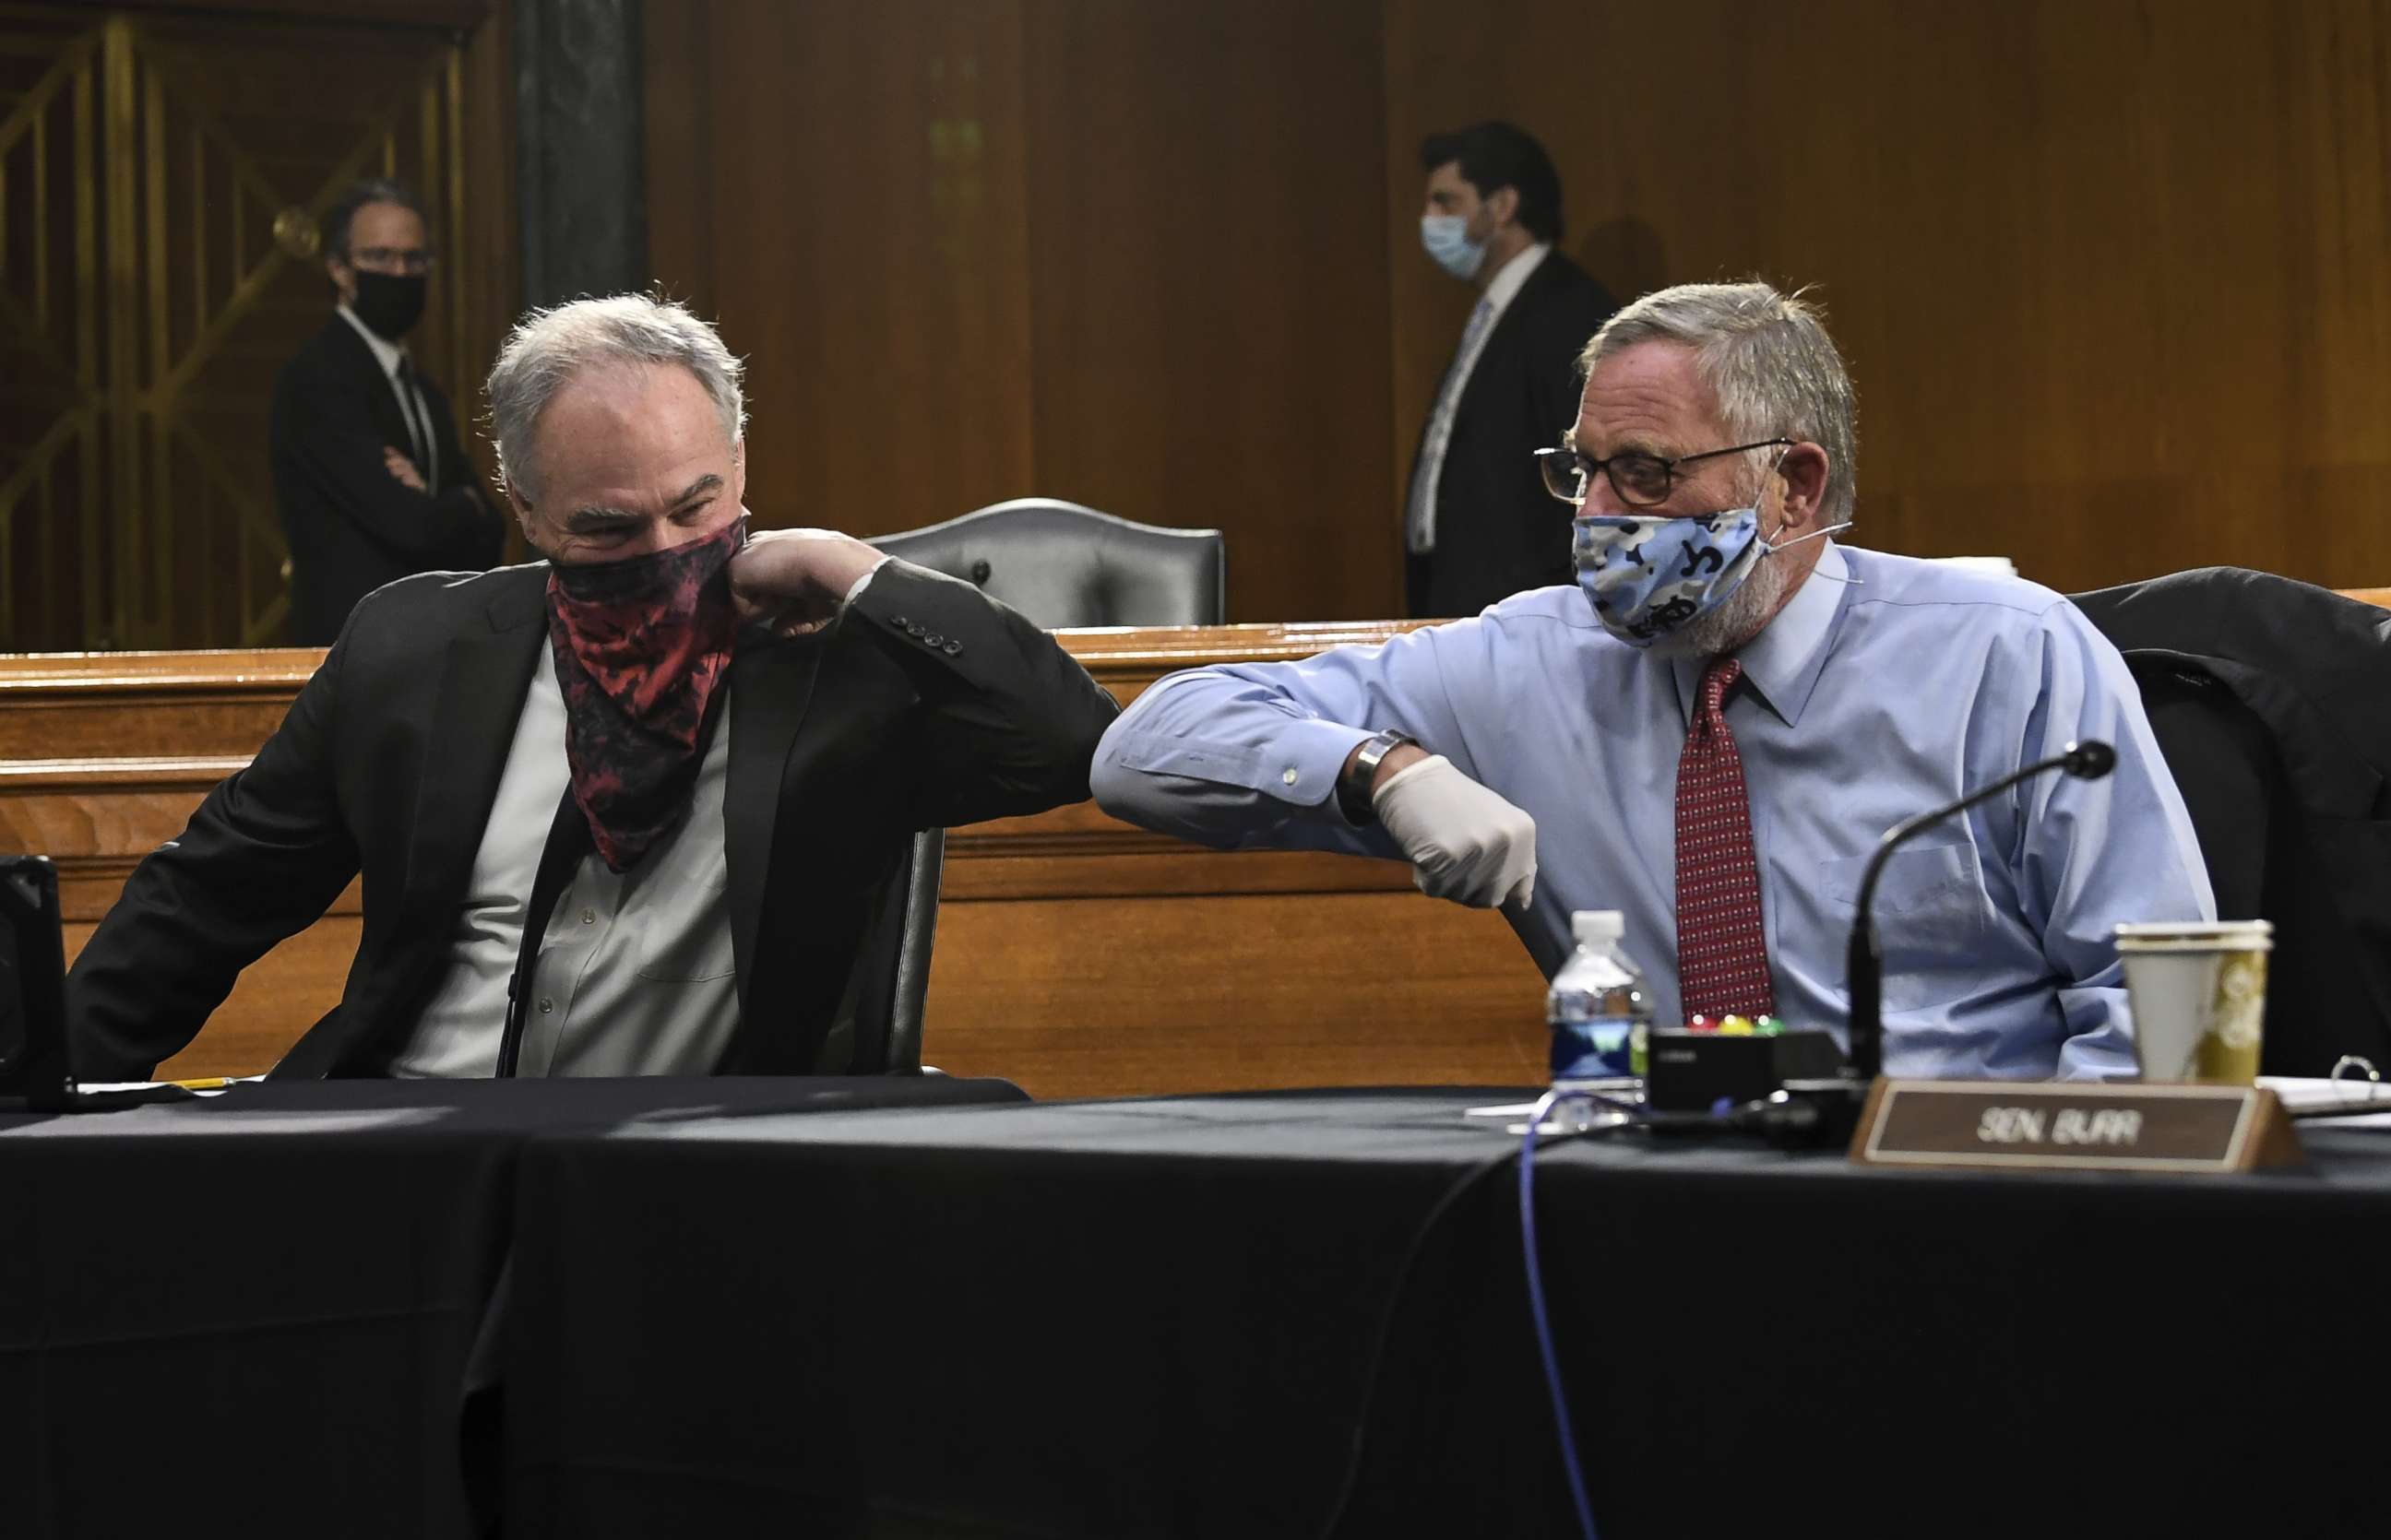 PHOTO: Senators Tim Kaine and Richard Burr greet each other with an elbow bump before the Senate Committee for Health, Education, Labor, and Pensions hearing on COVID-19, May 12, 2020, in Washington.